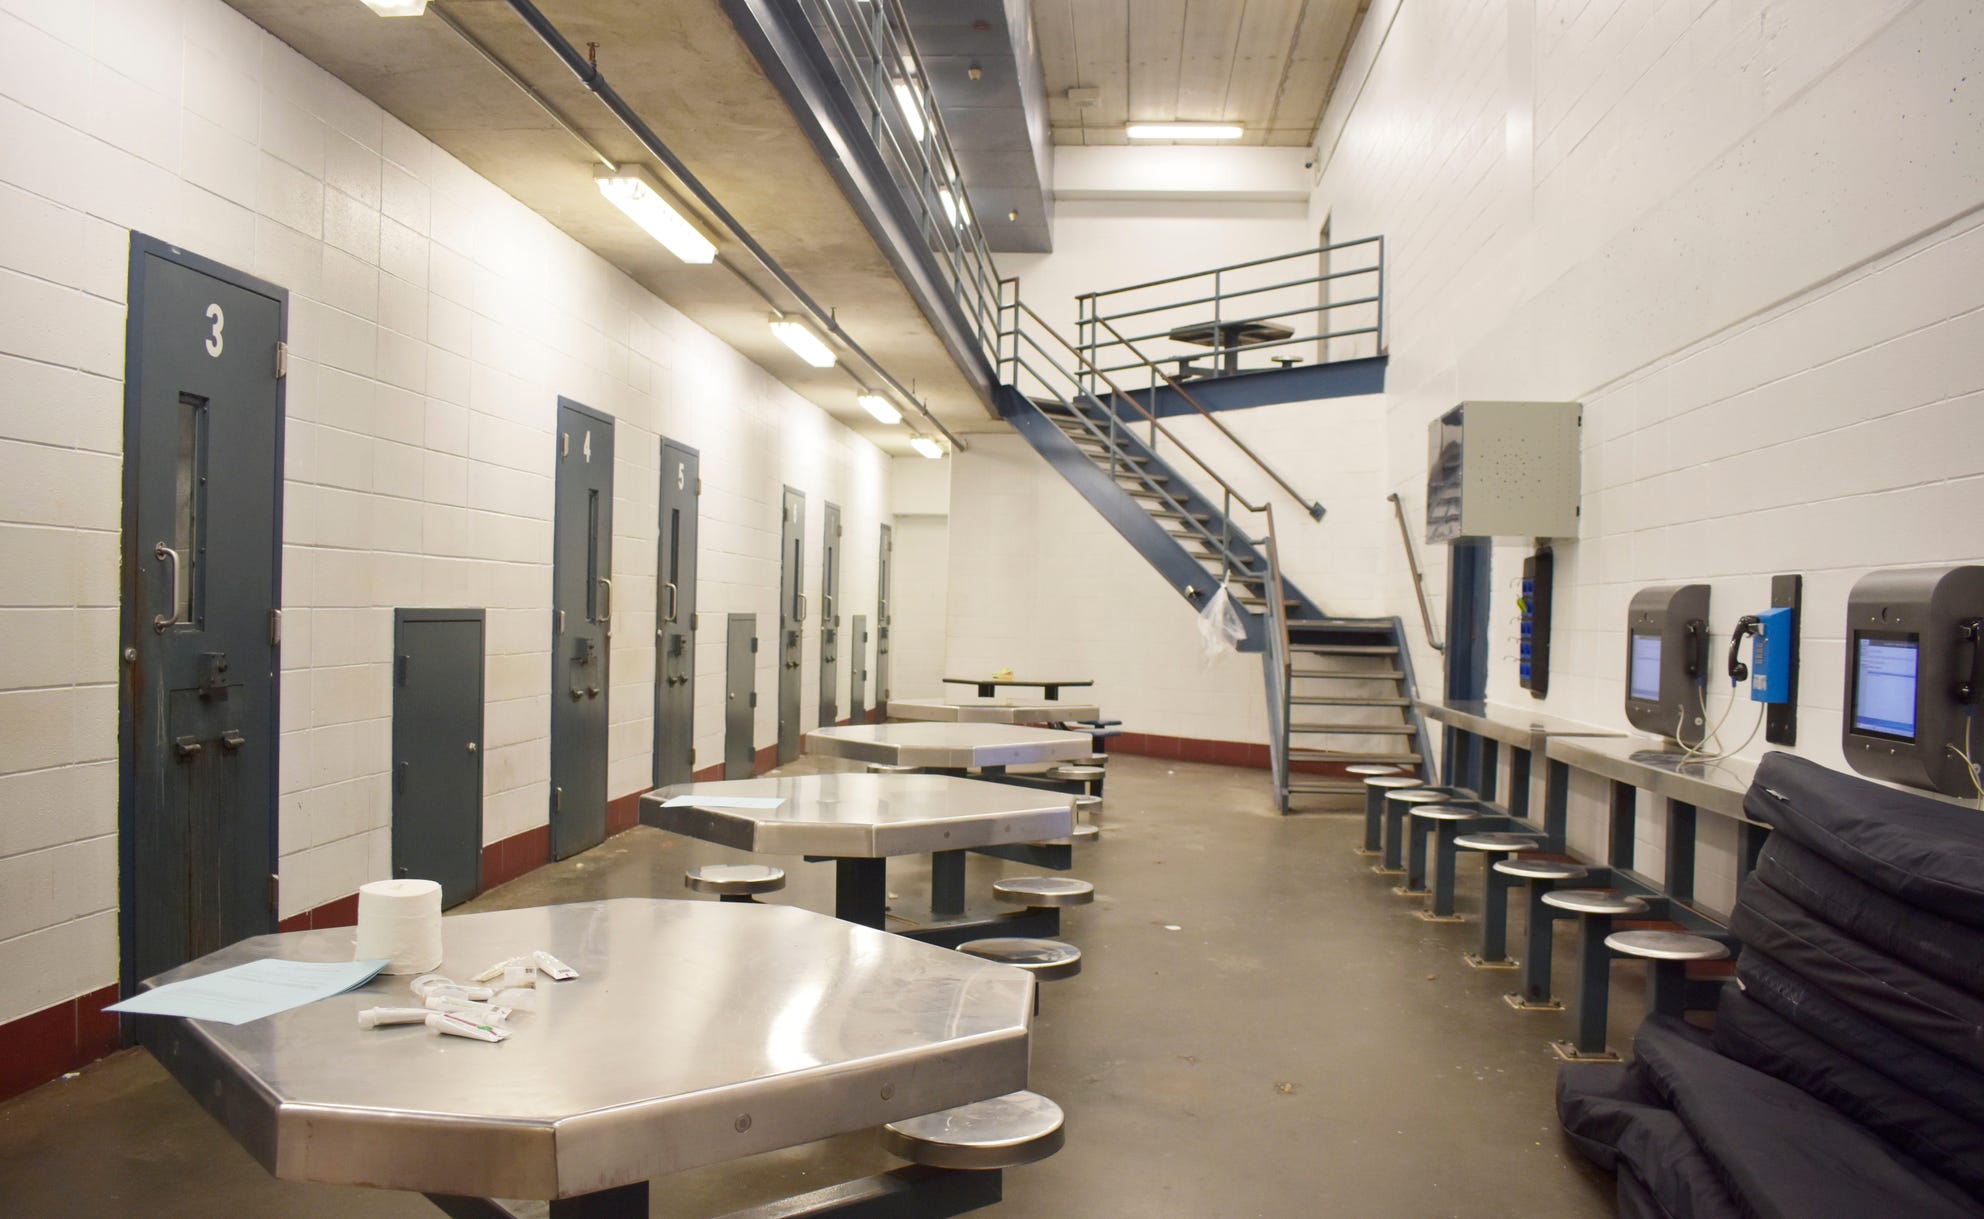 Recidivism contributes to crowding at Monroe County jail